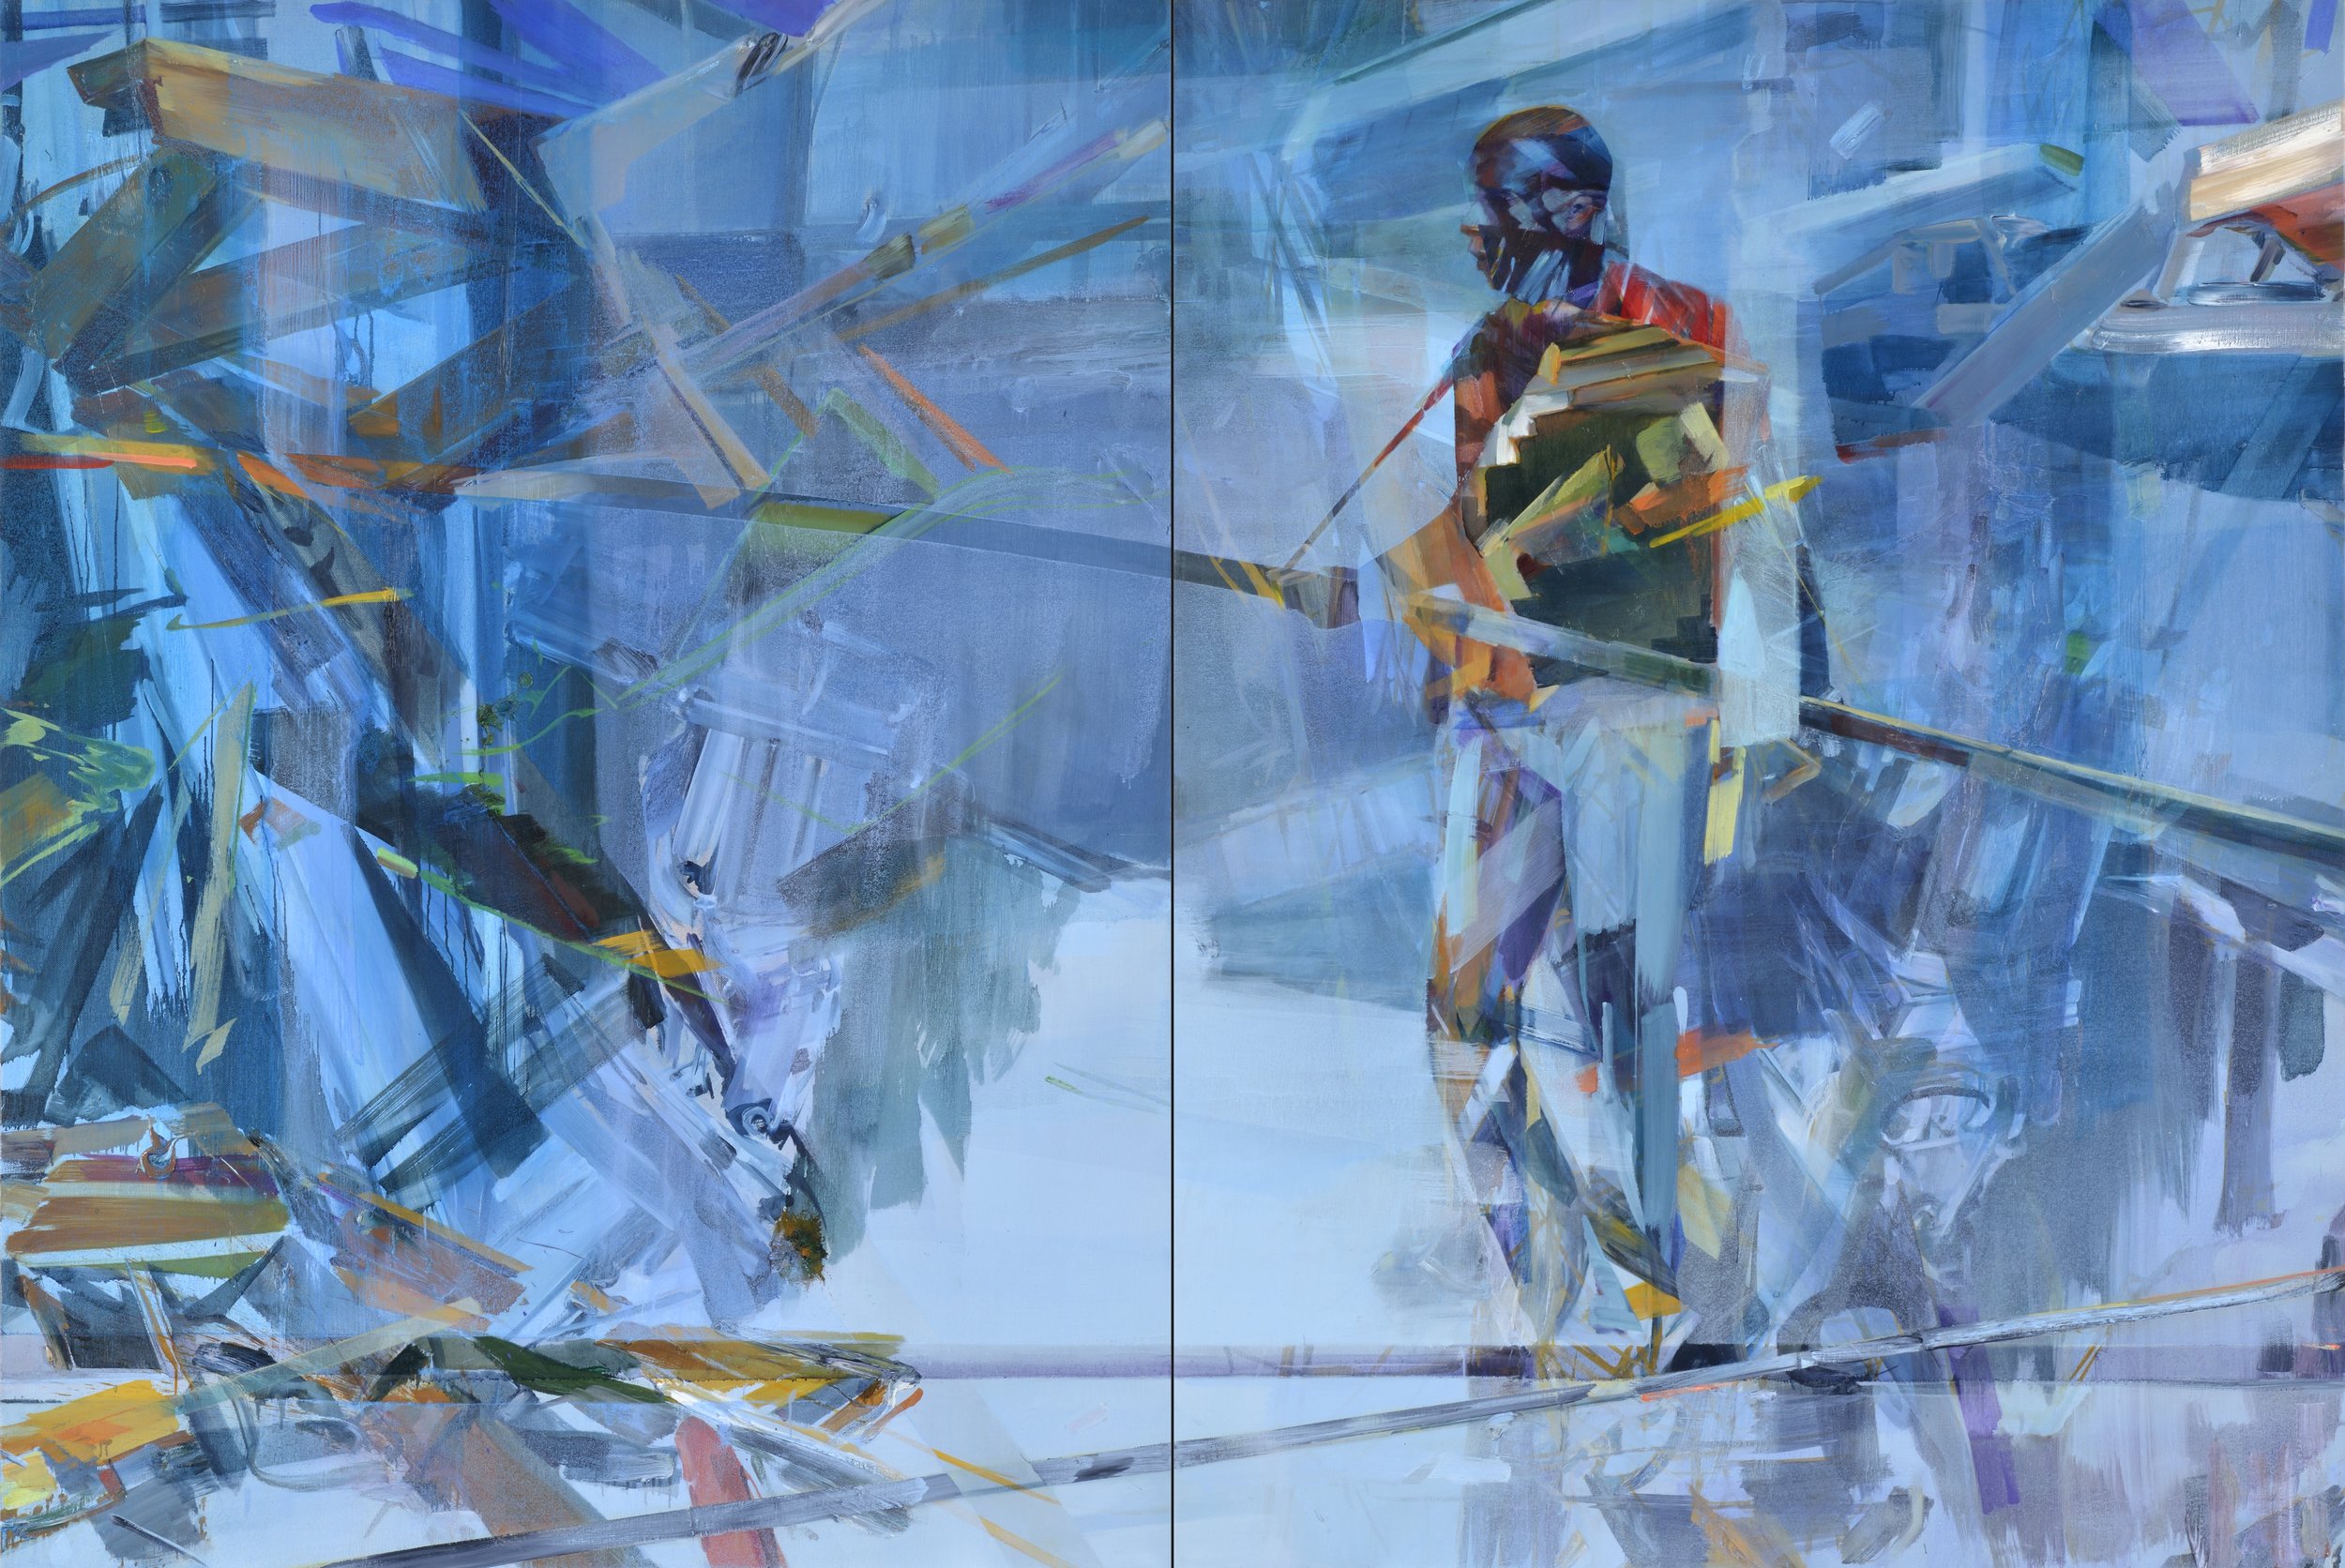   Timeline , 2015, oil and alkyd on canvas, 200 x 300cm (diptych). Private collection (Belgium) 